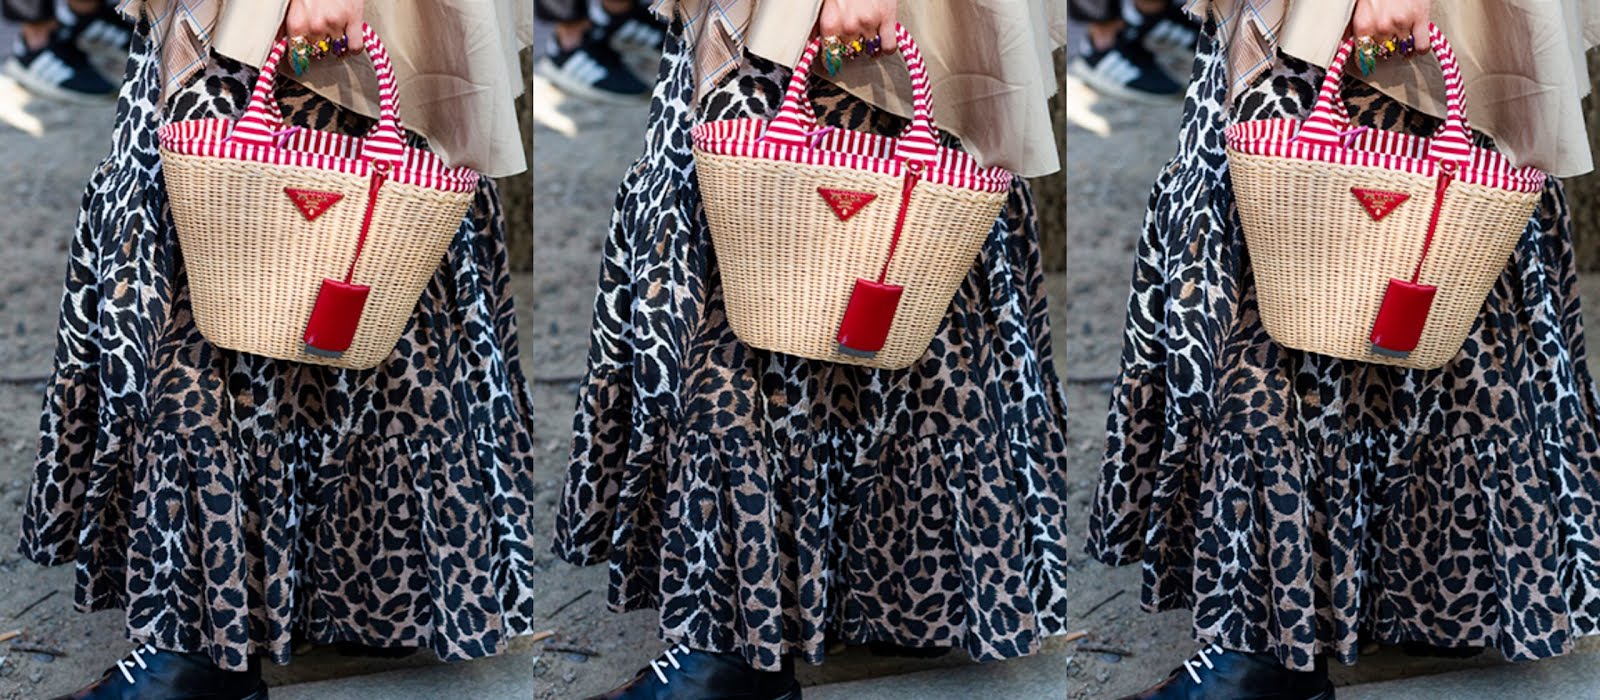 Are you a beach girl or a city girl? These basket bags work for both